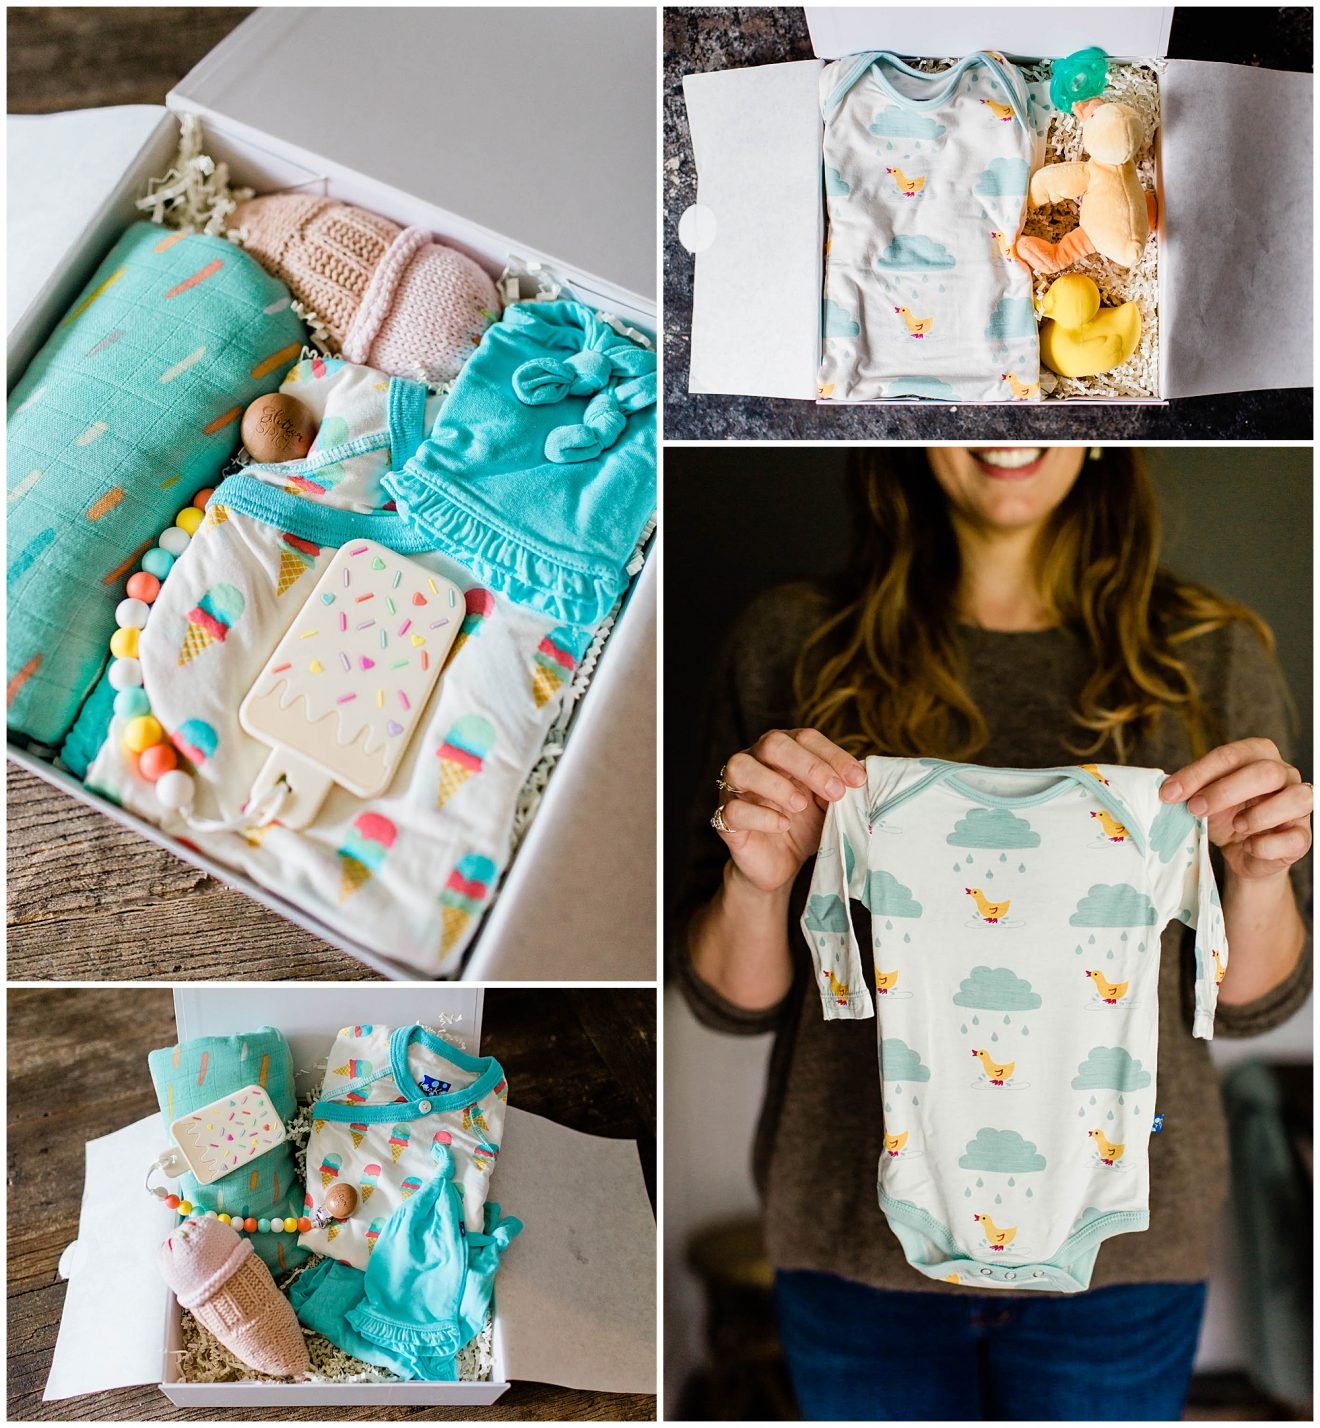 An ice cream scoops themed Baby Boxy gift box and Blue Puddle Ducks themed Baby Boxy.